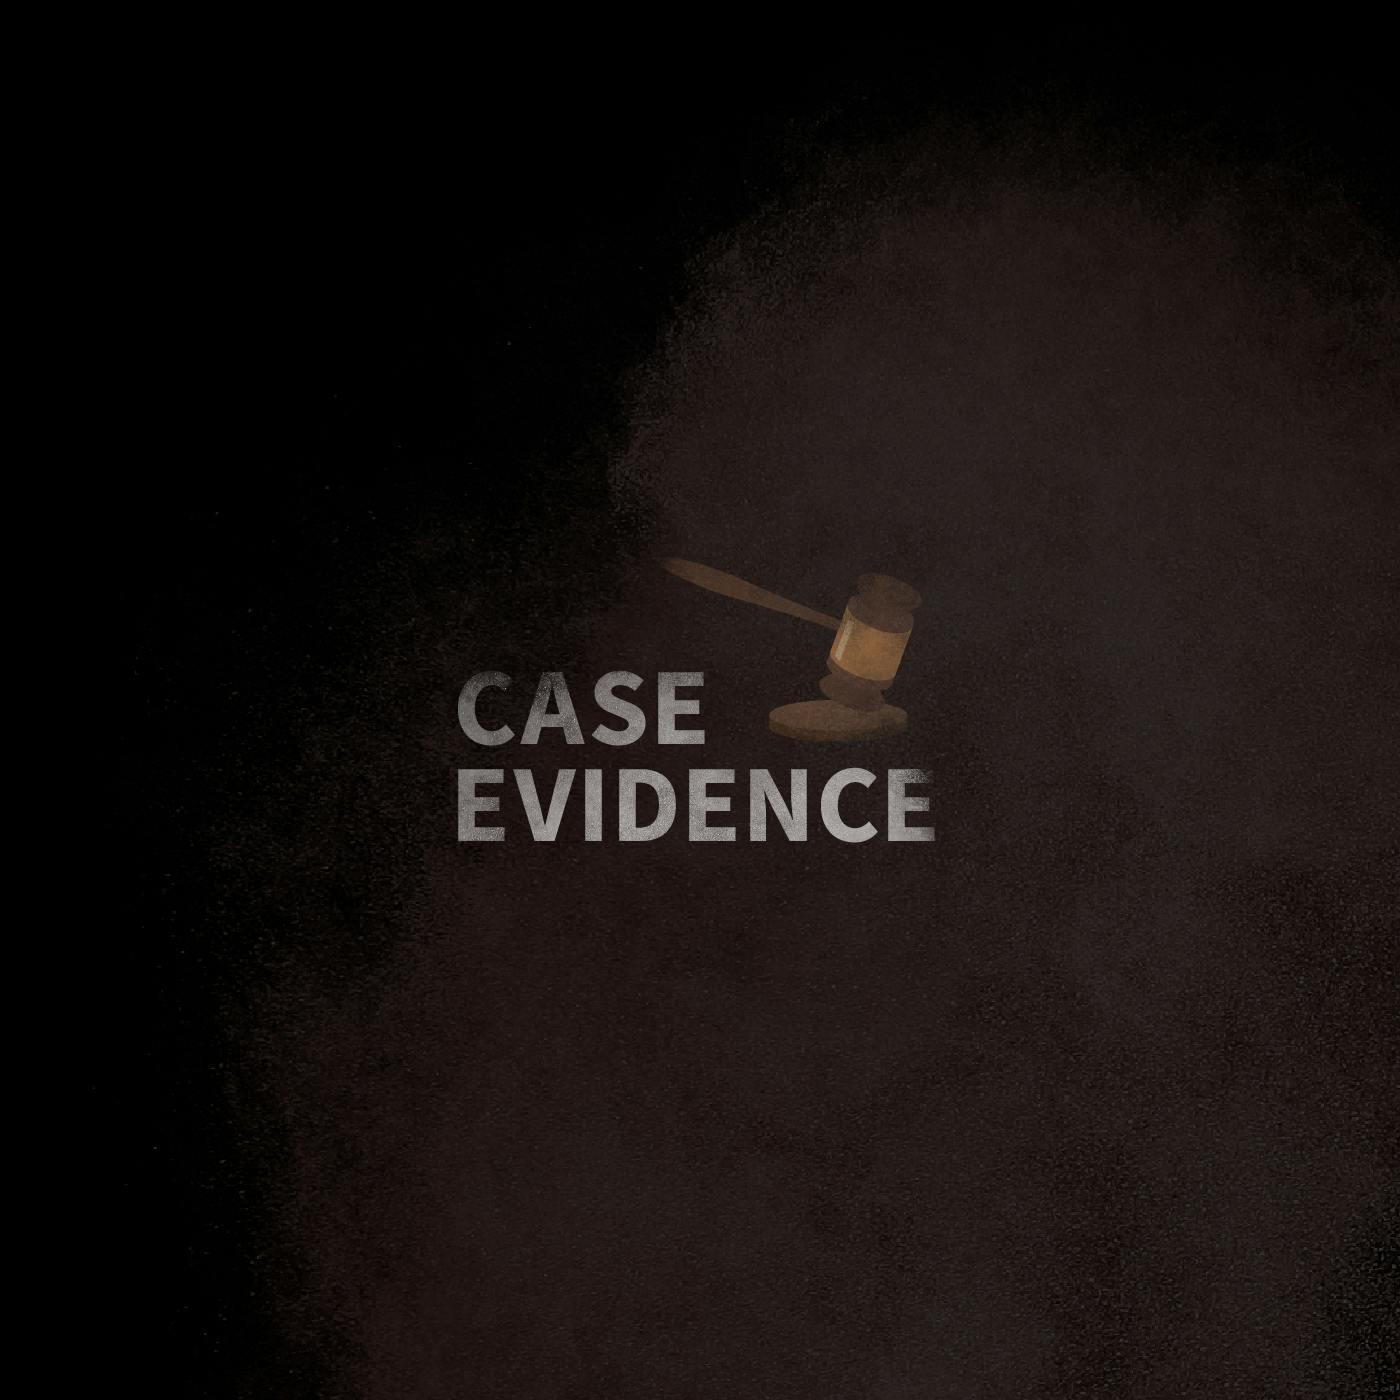 Case Evidence 01.09.17 by Tenderfoot TV